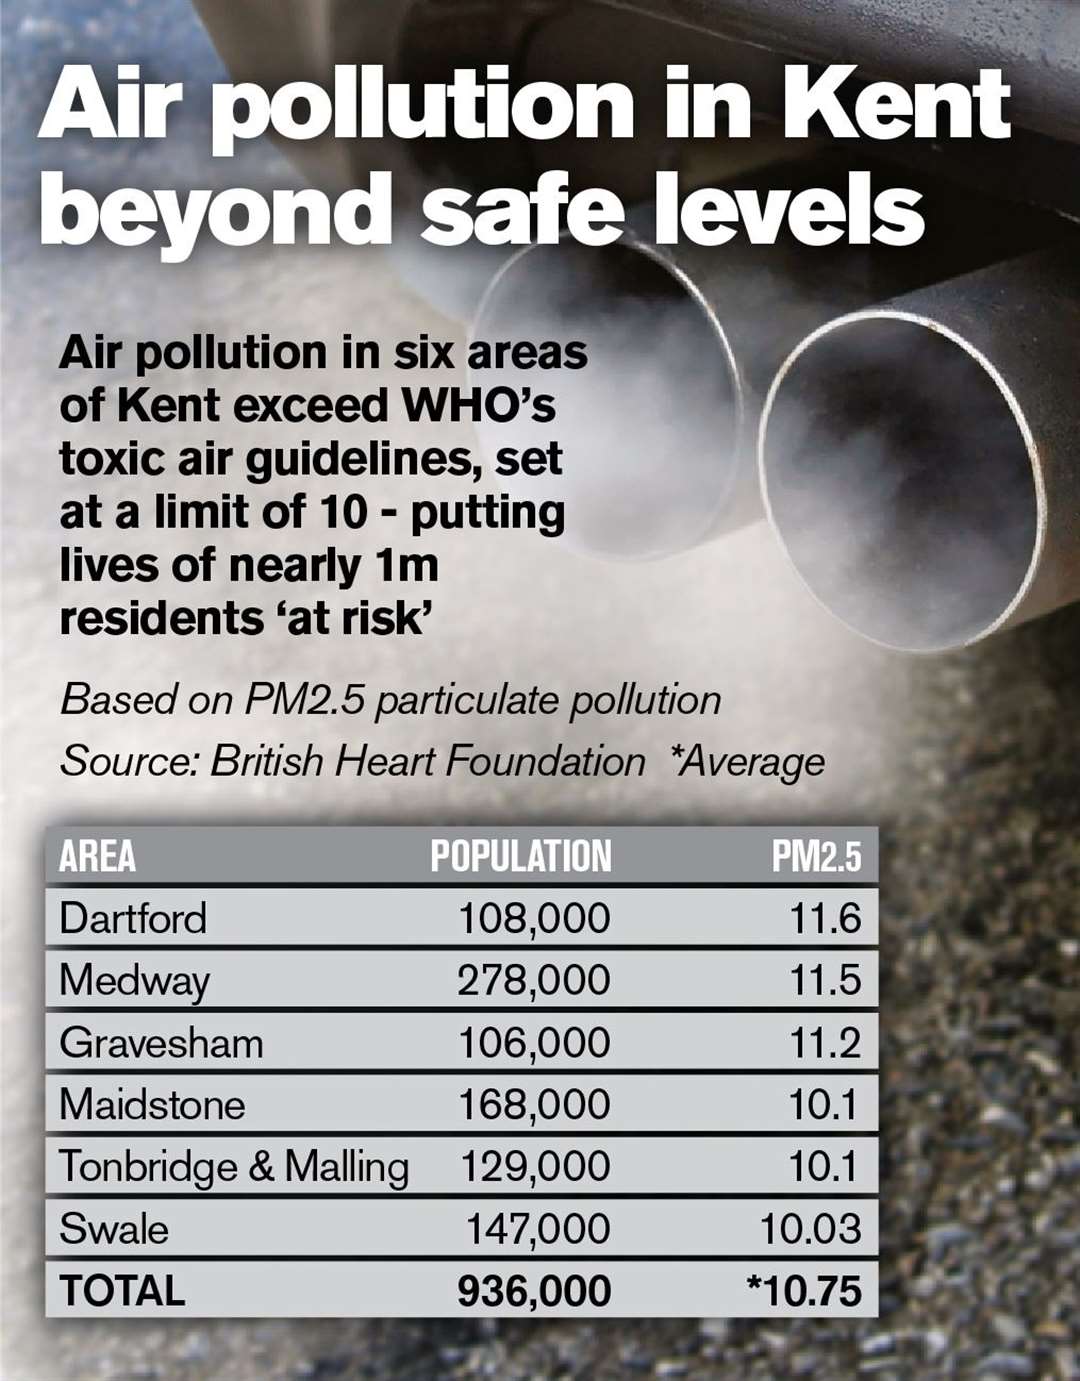 Air pollution levels as of research taken February 2020